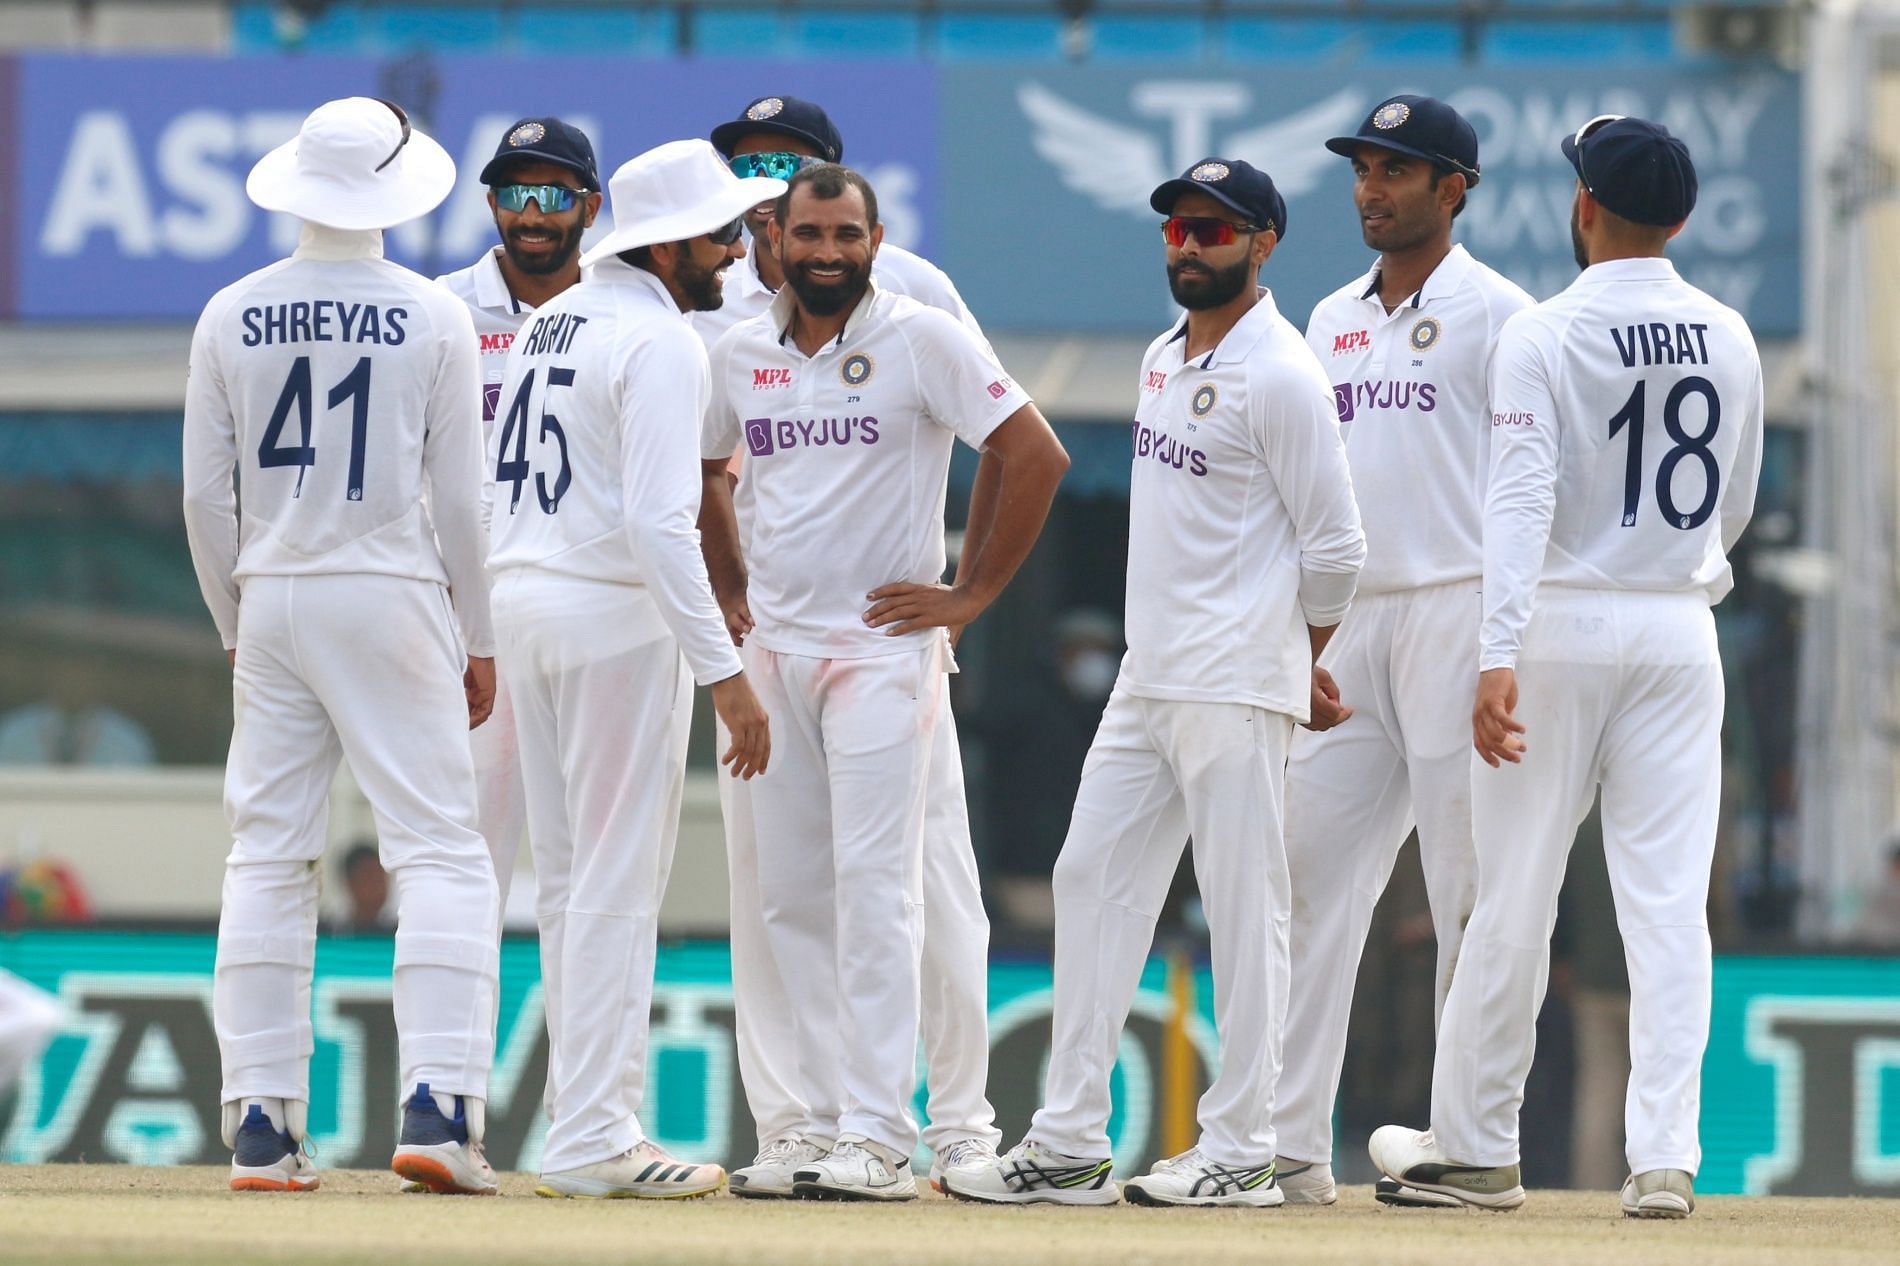 Indian team celebrates a wicket during the Mohali Test. Pic: BCCI